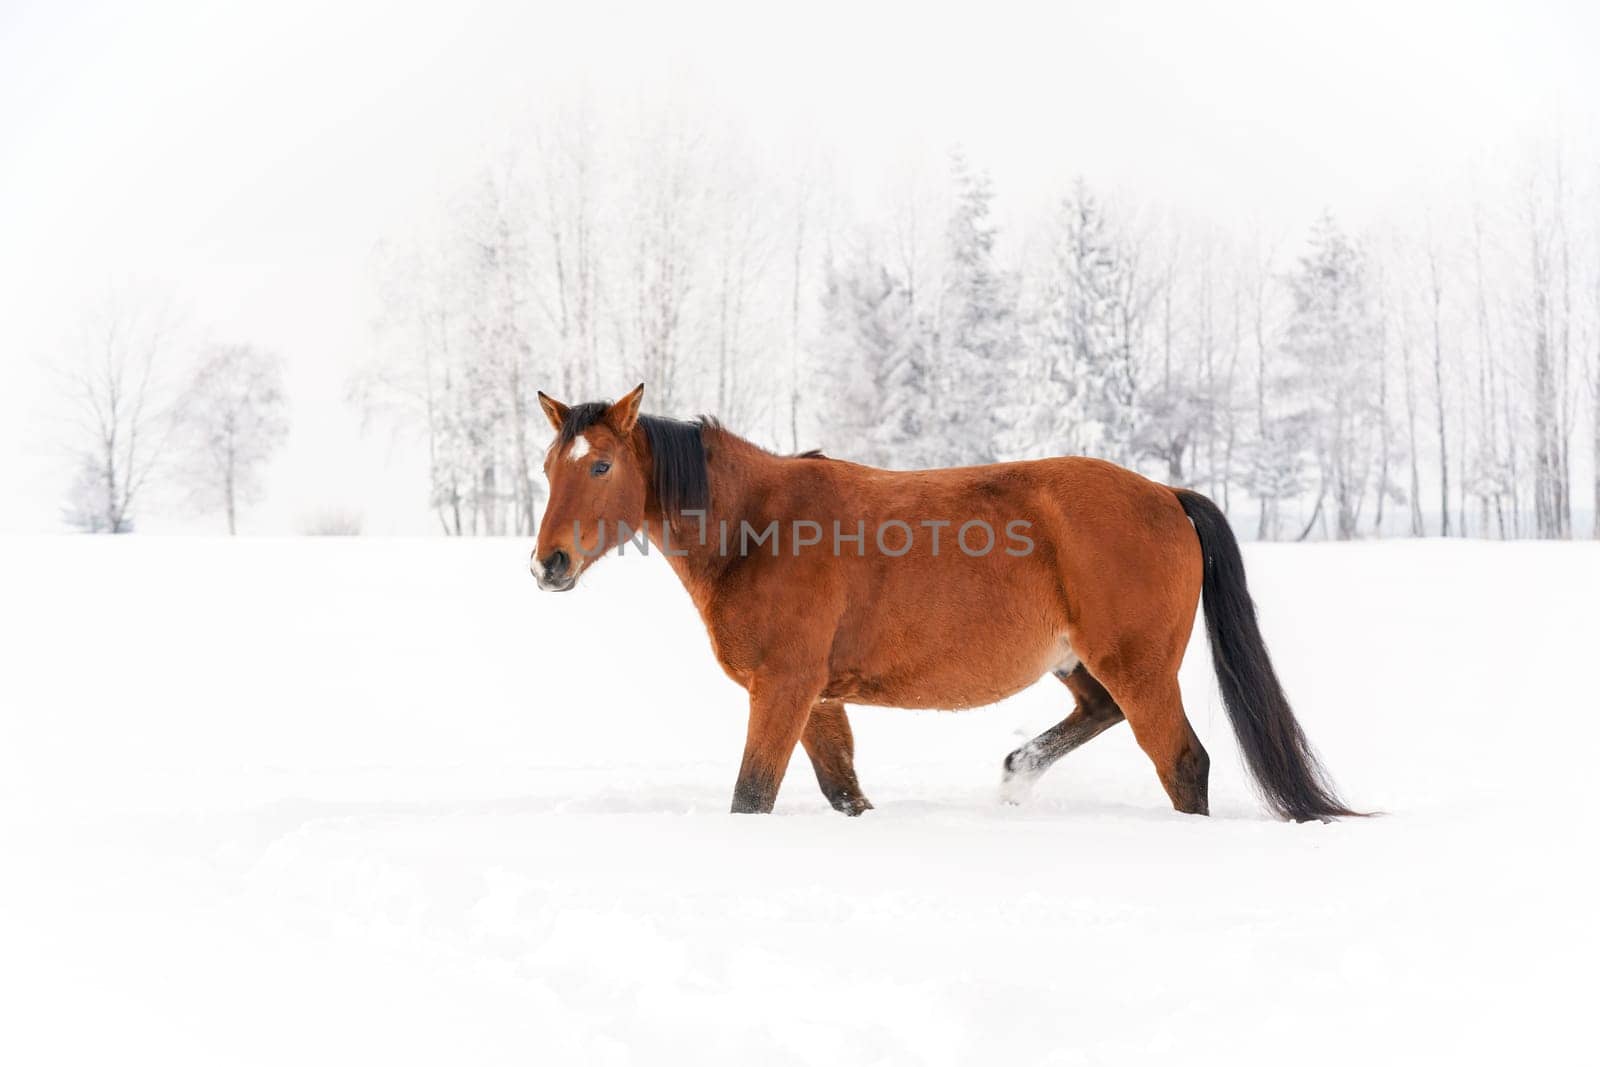 Brown horse on snow covered field, overcast morning, blurred trees in background. by Ivanko